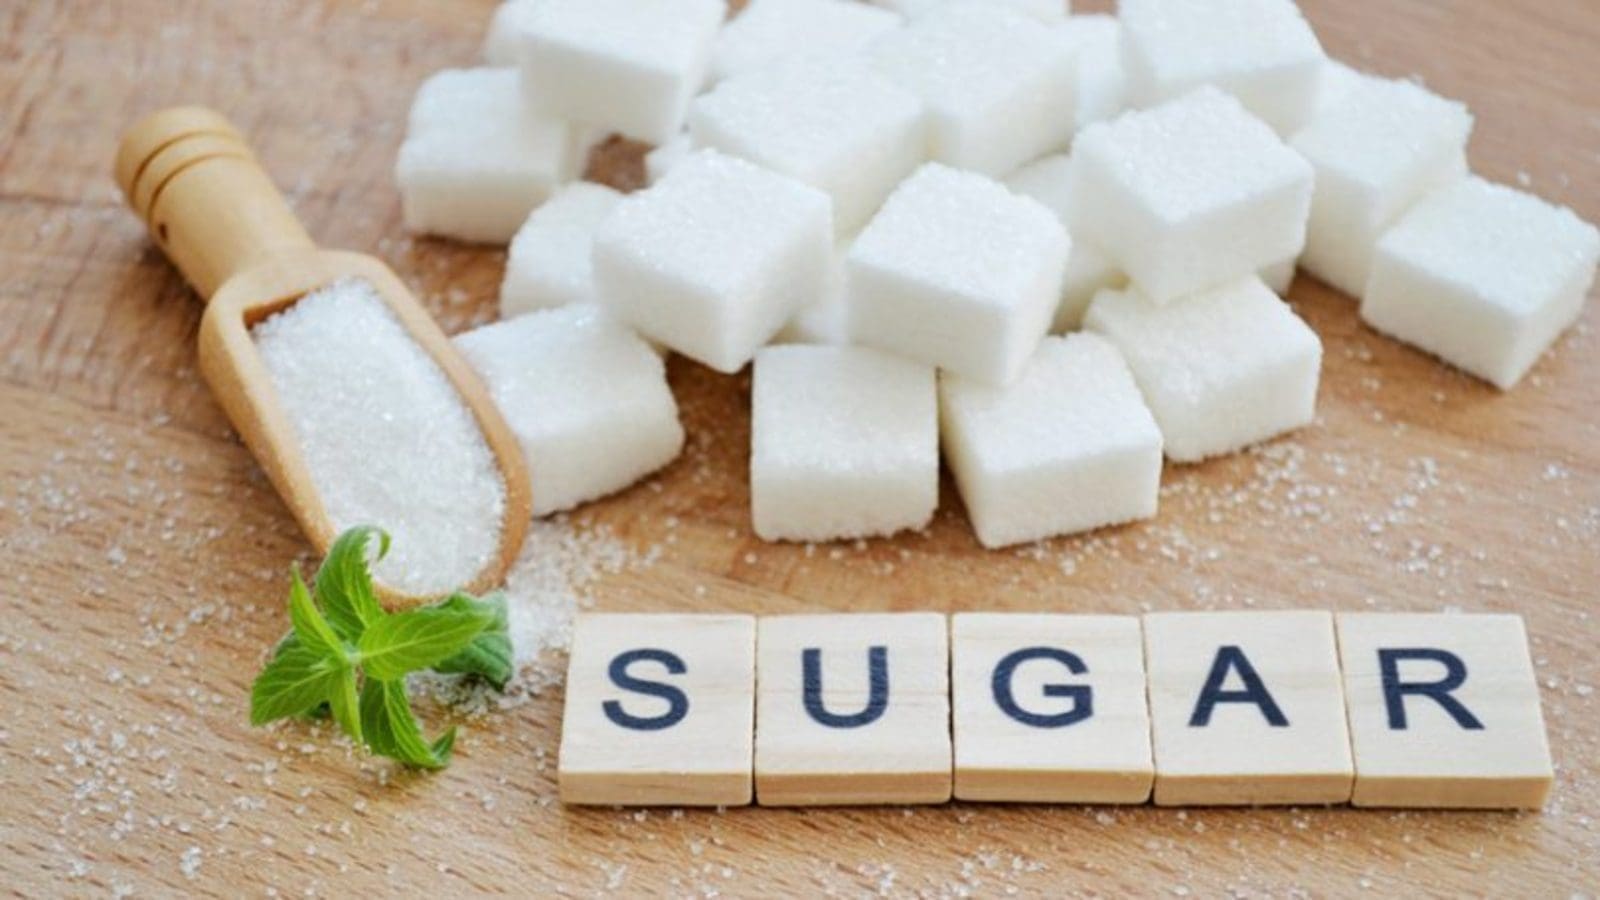 Reducing sugar in packaged foods, beverages could prevent 500,000 deaths, new US study finds